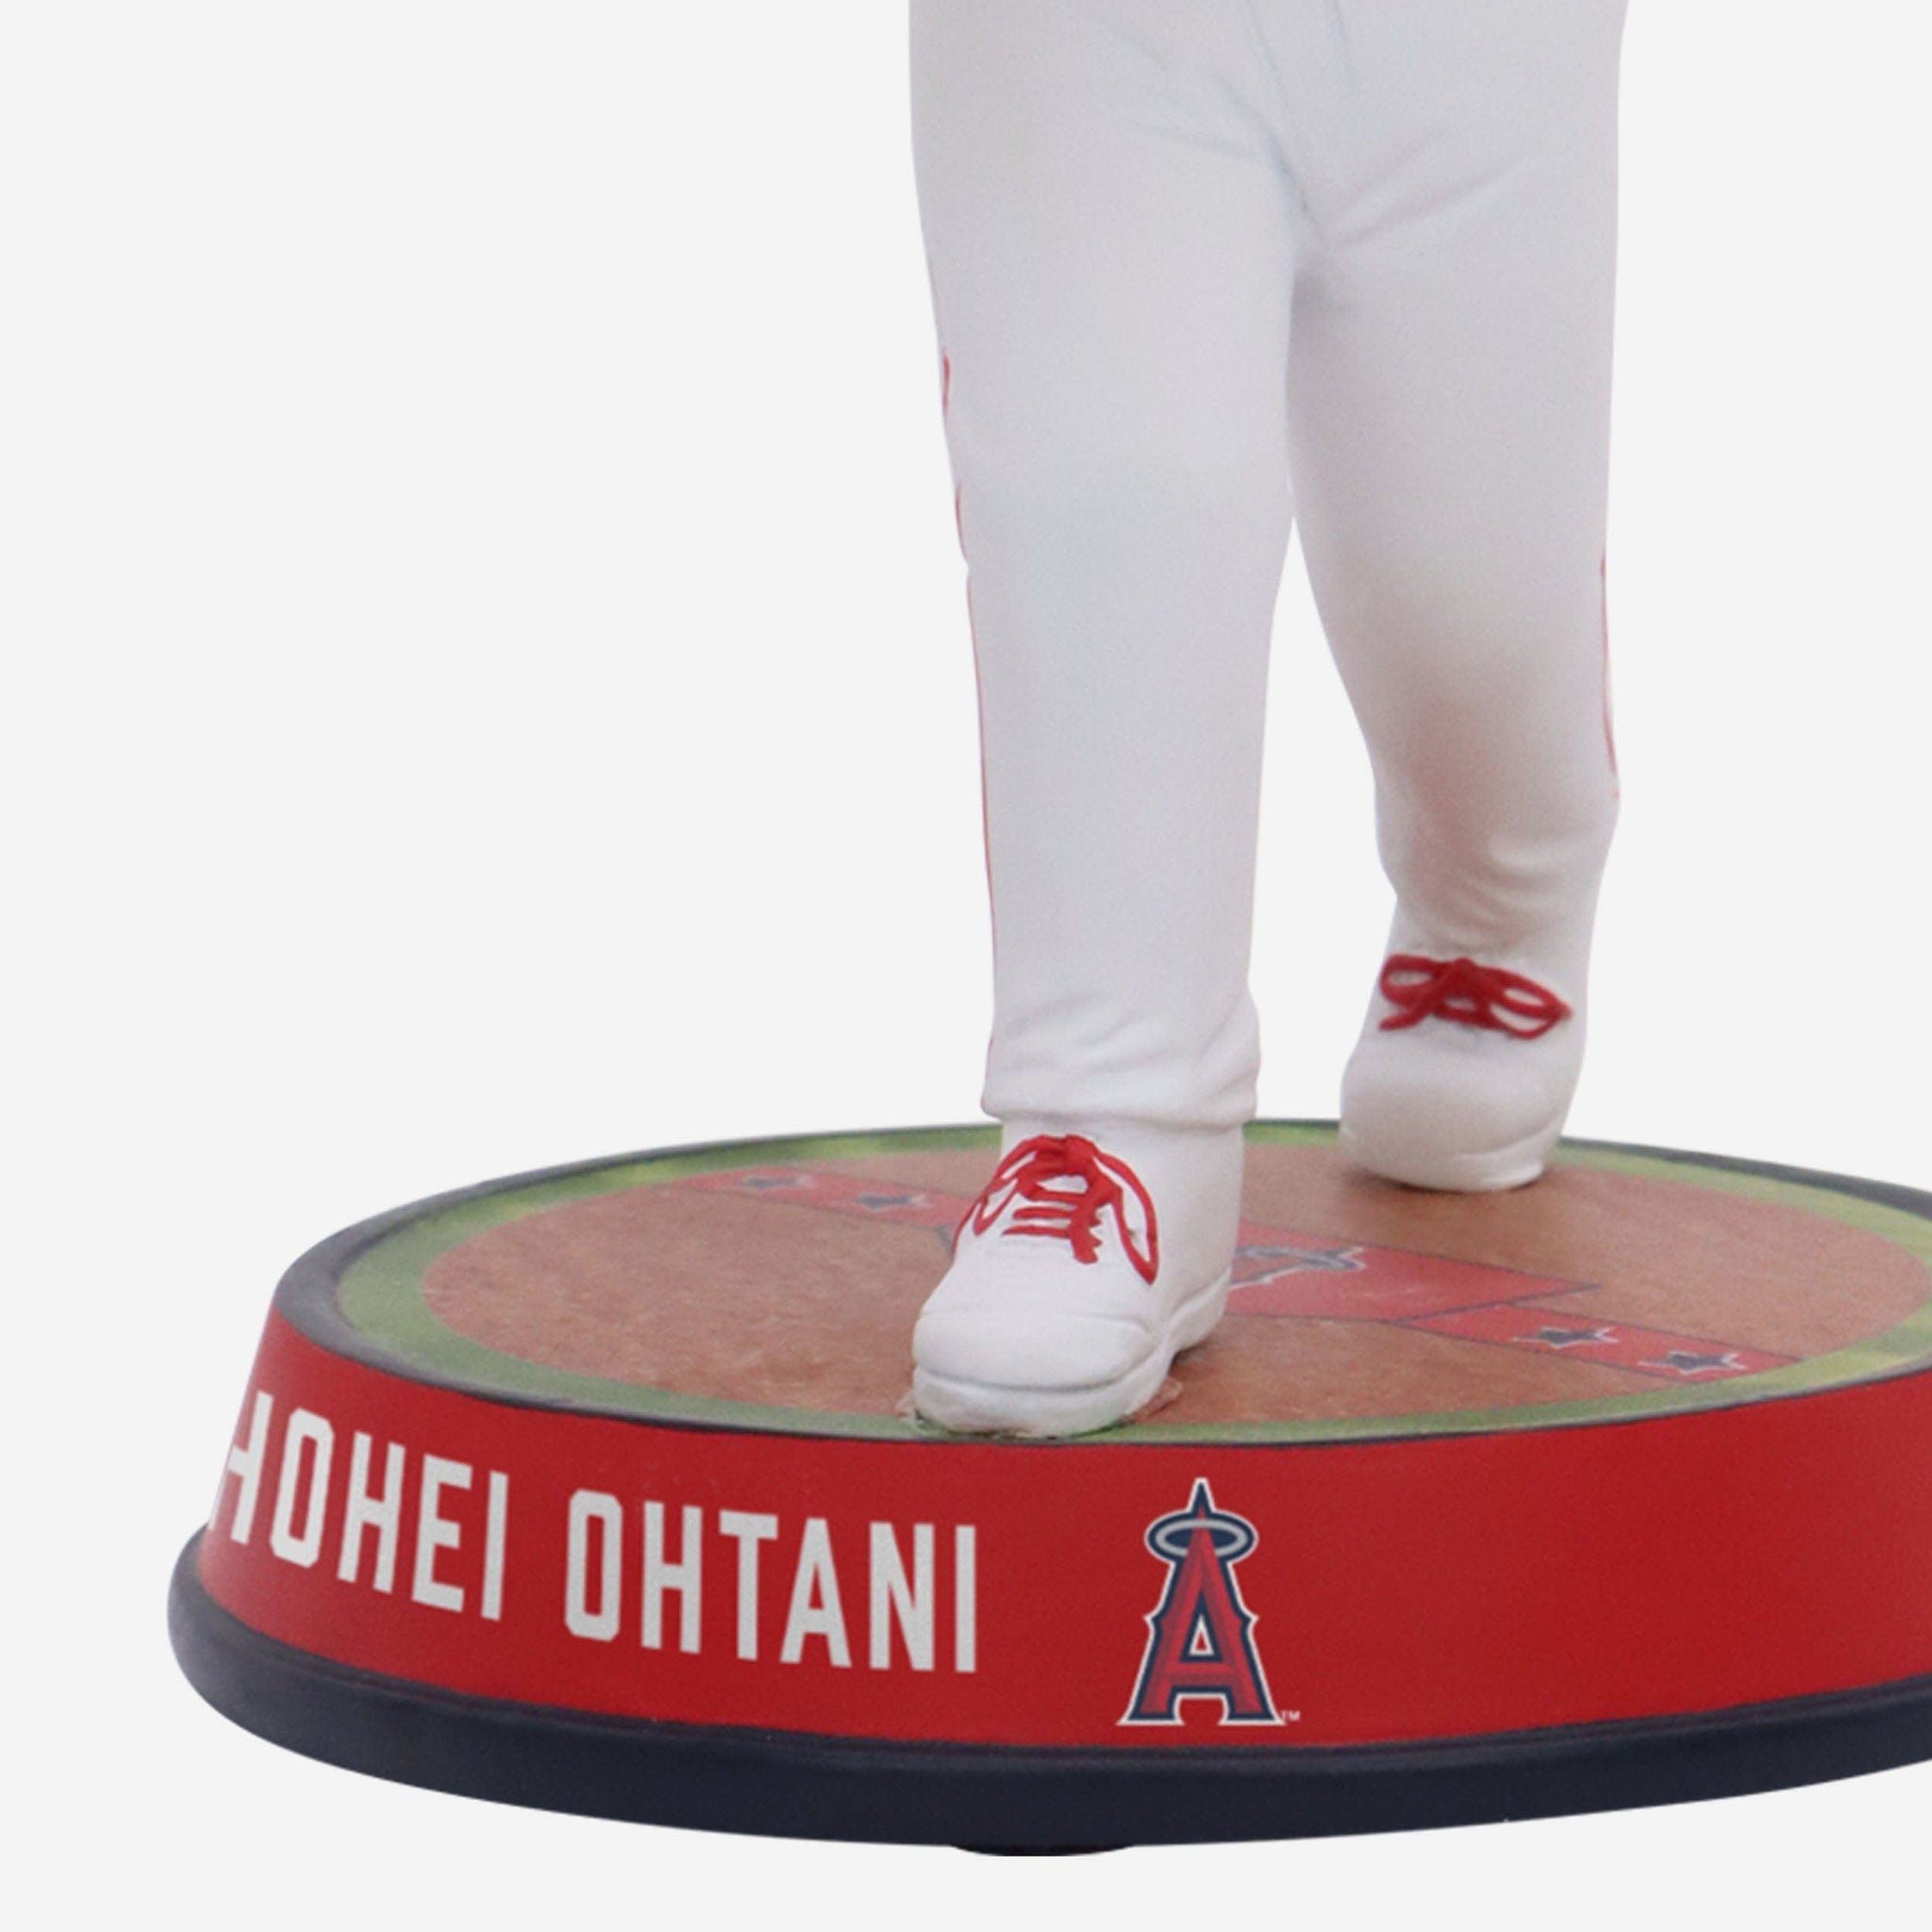 Official Shohei Ohtani Los Angeles Angels Jerseys, Shohei Ohtani Shirts,  Angels Apparel, Shohei Ohtani Gear